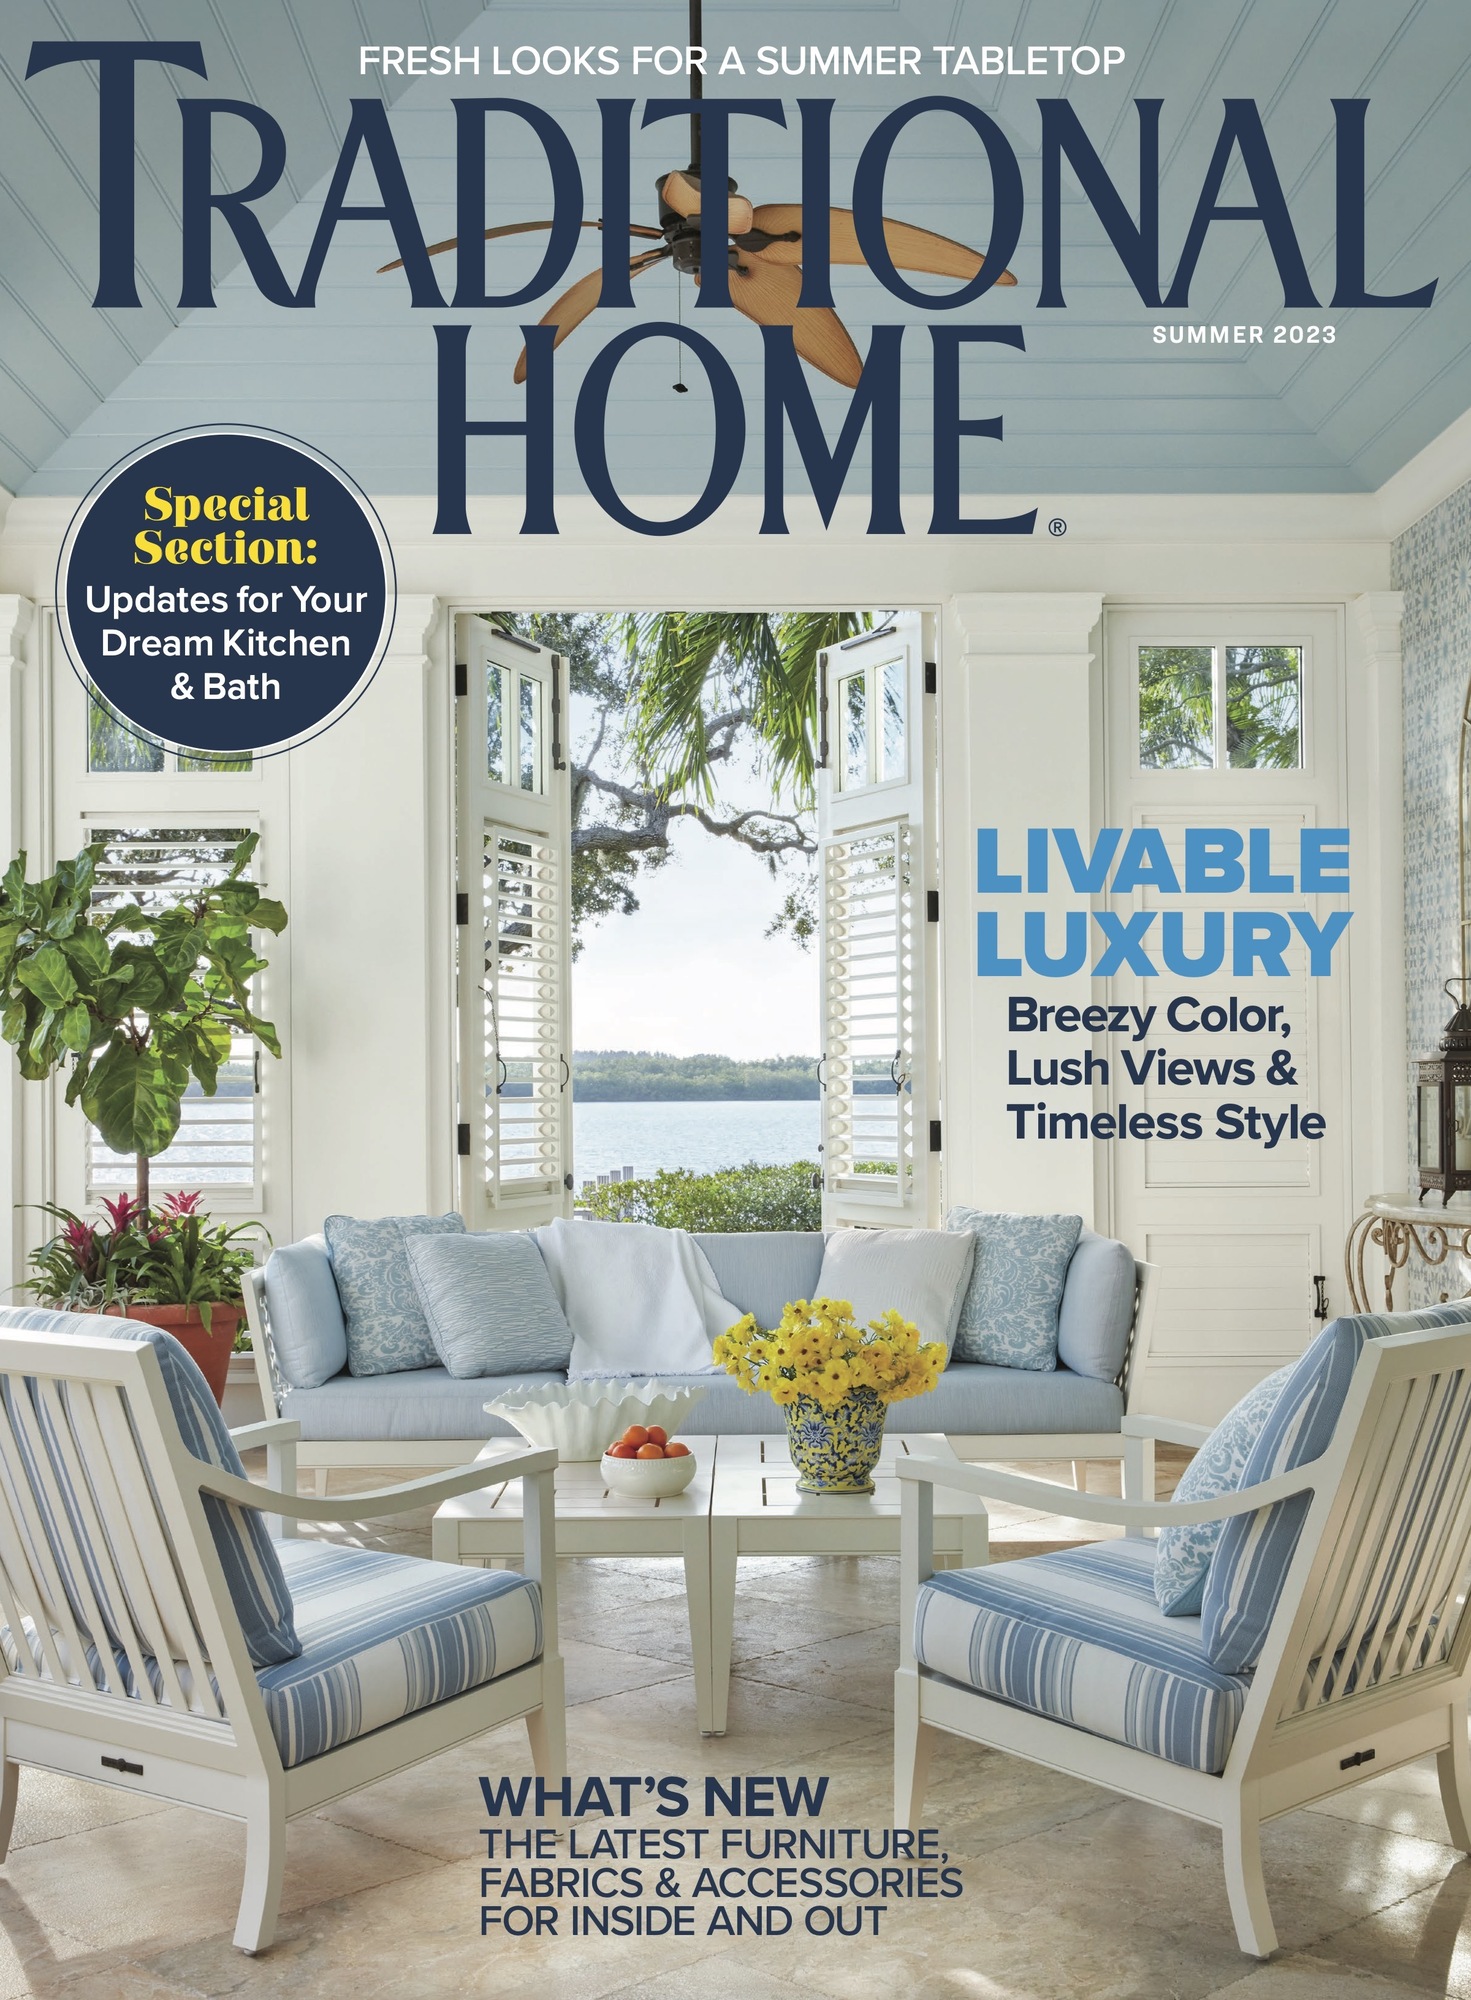 Traditional Home Cover Summer 2023 Livable luxury